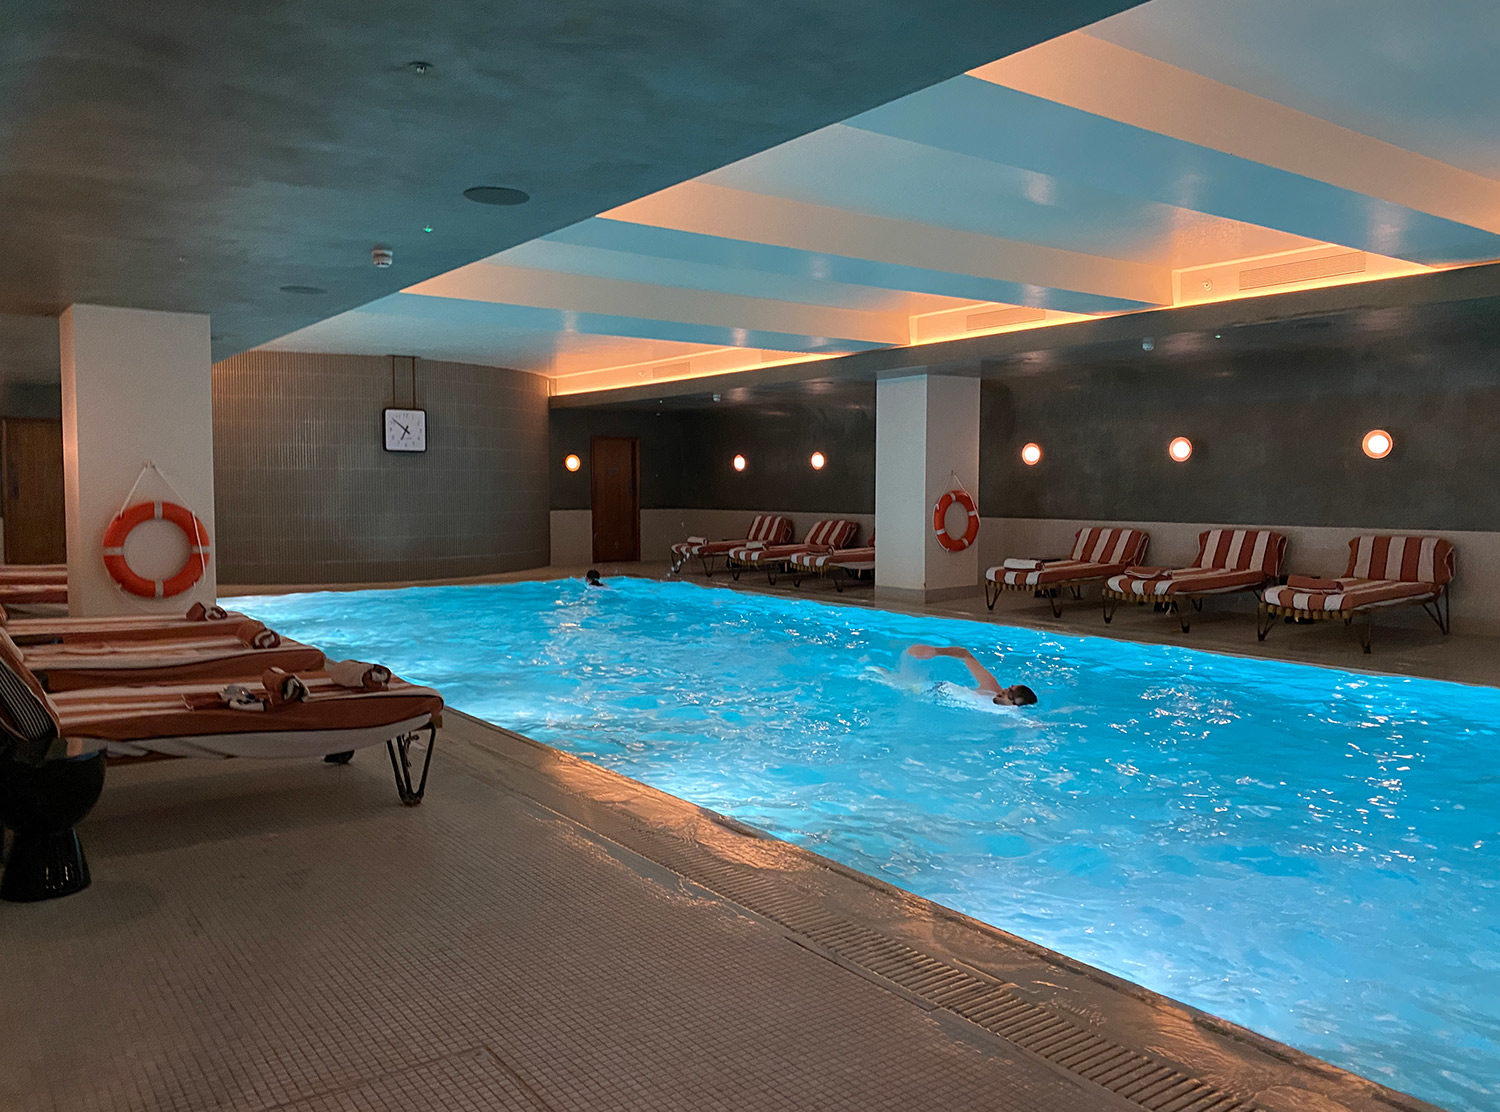 White City House If the show stopping gym wasn't enough, the indoor lap pool, plus a steam room, sauna and hammam definitely wins any gym lover over